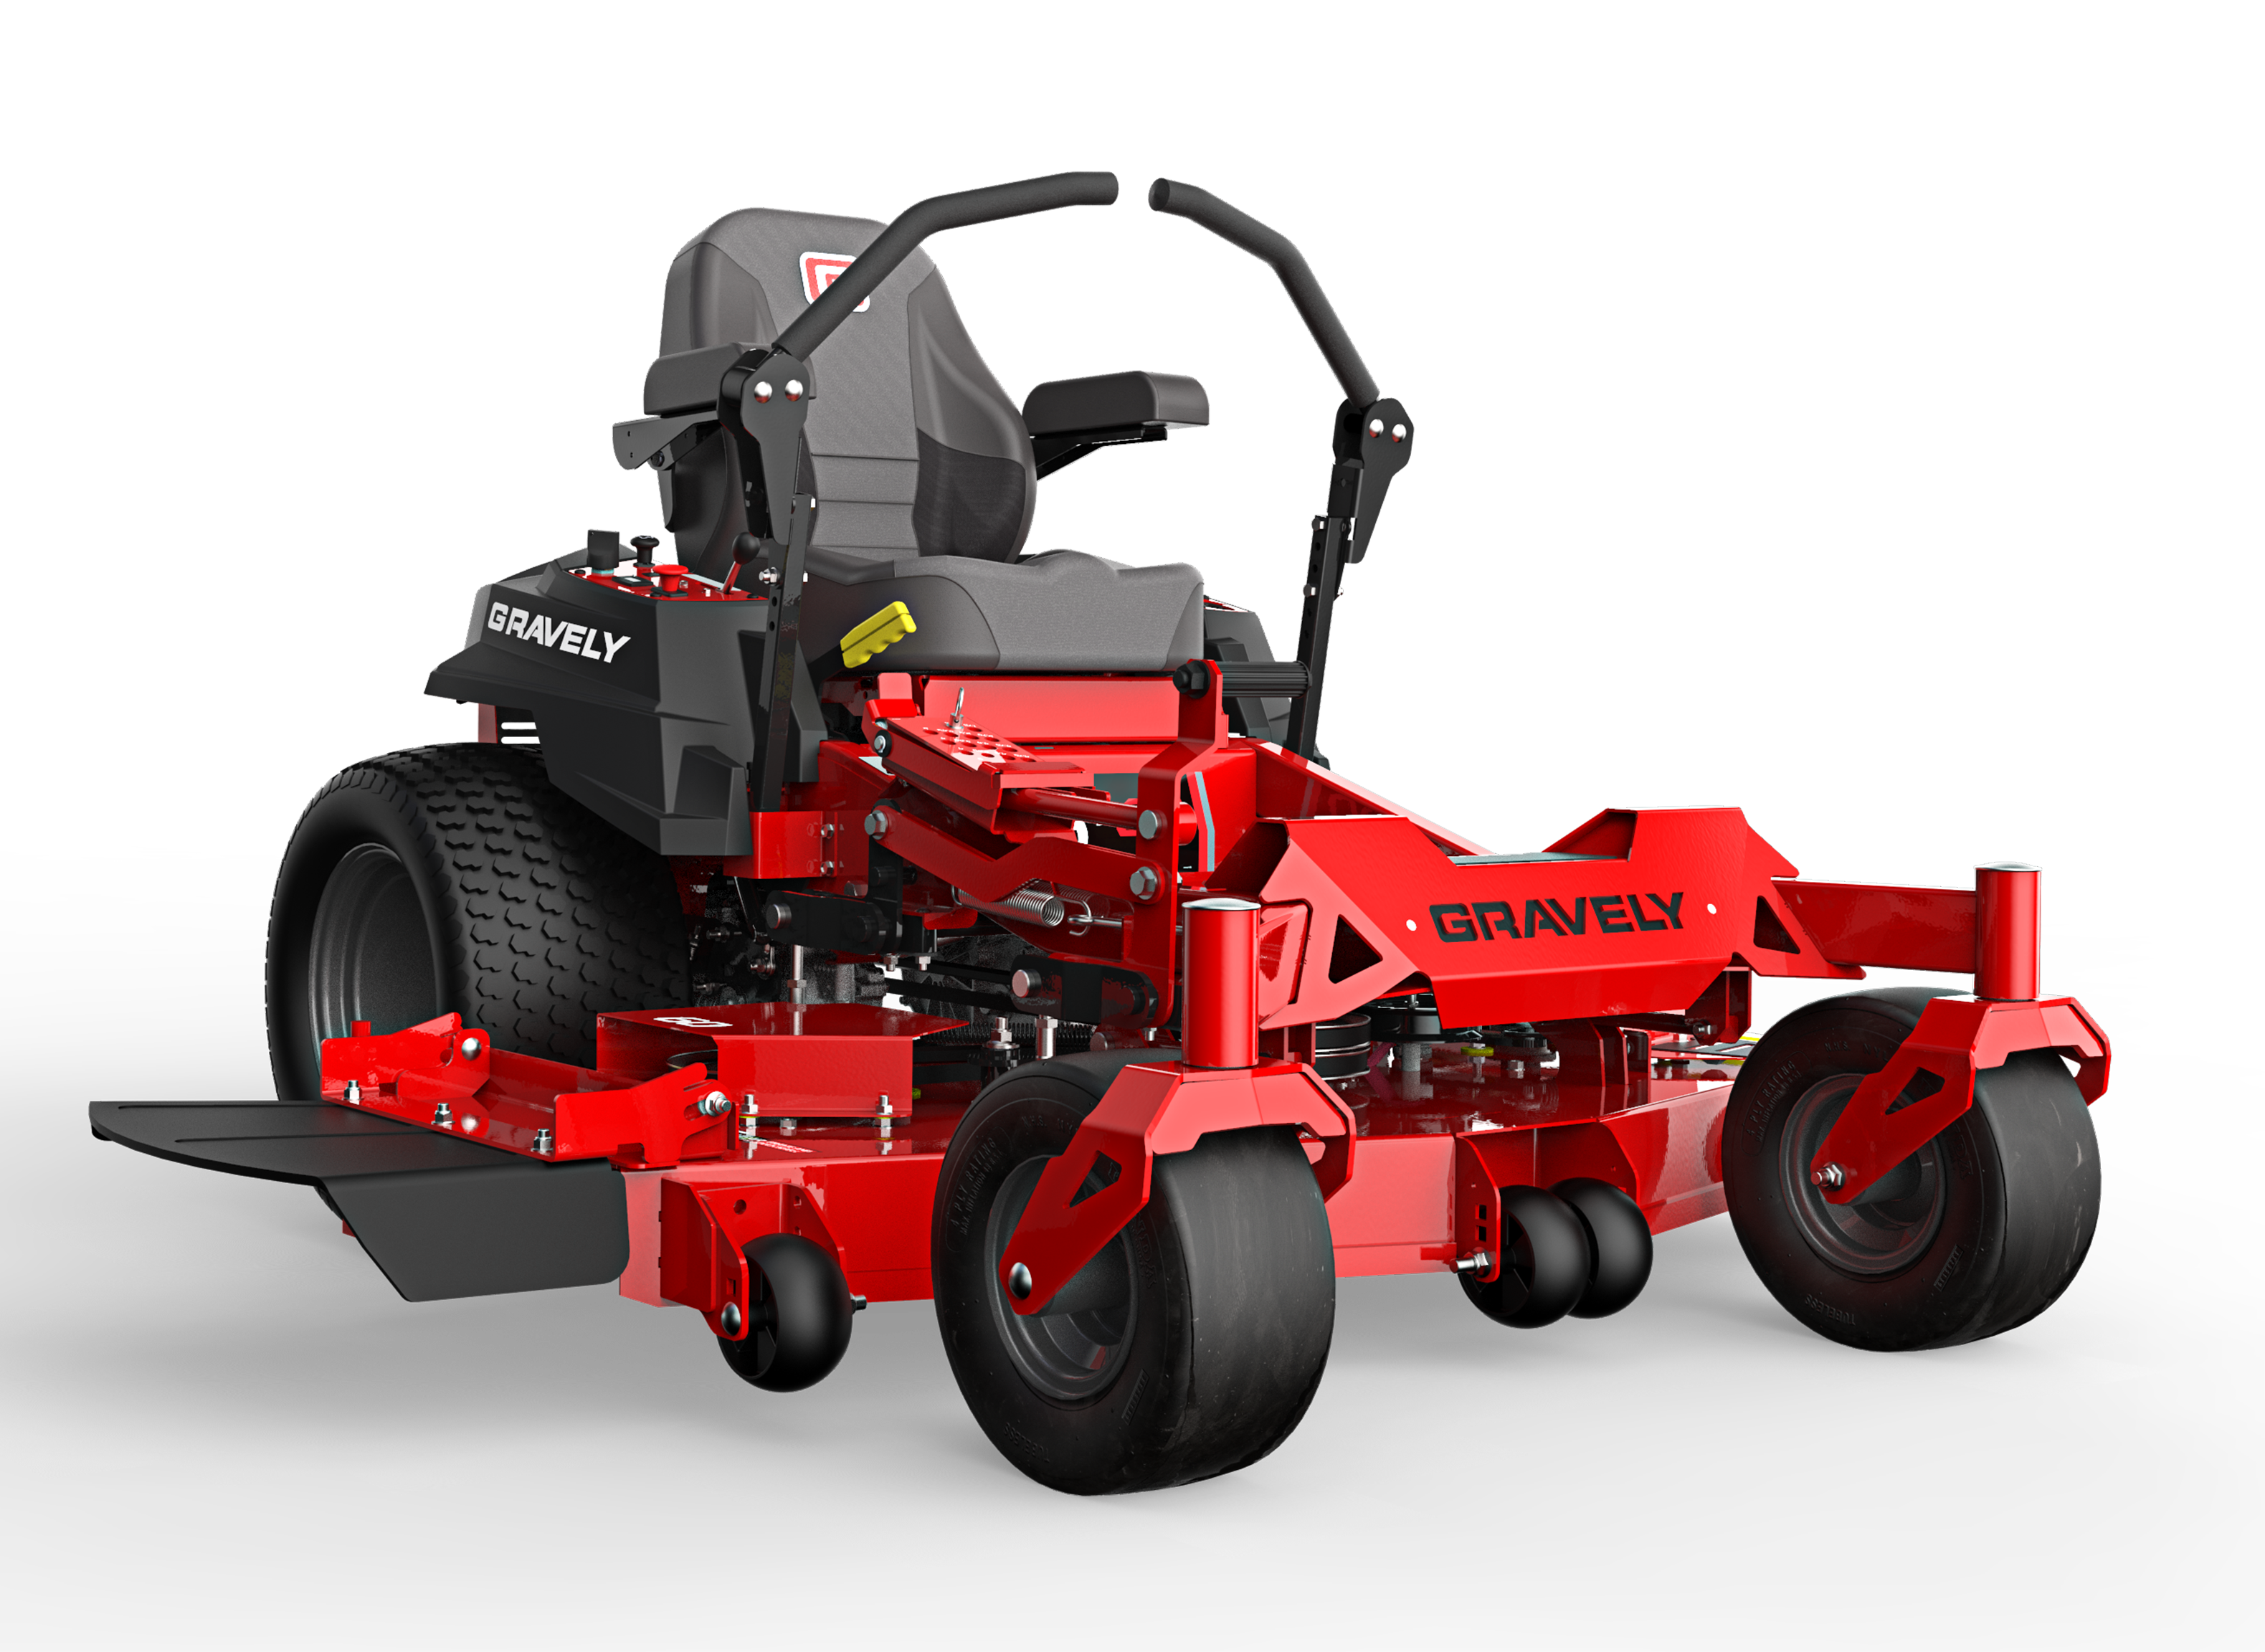 Gravely ZT HD 48 991152 Lawn Mower & Tractor Review - Consumer Reports